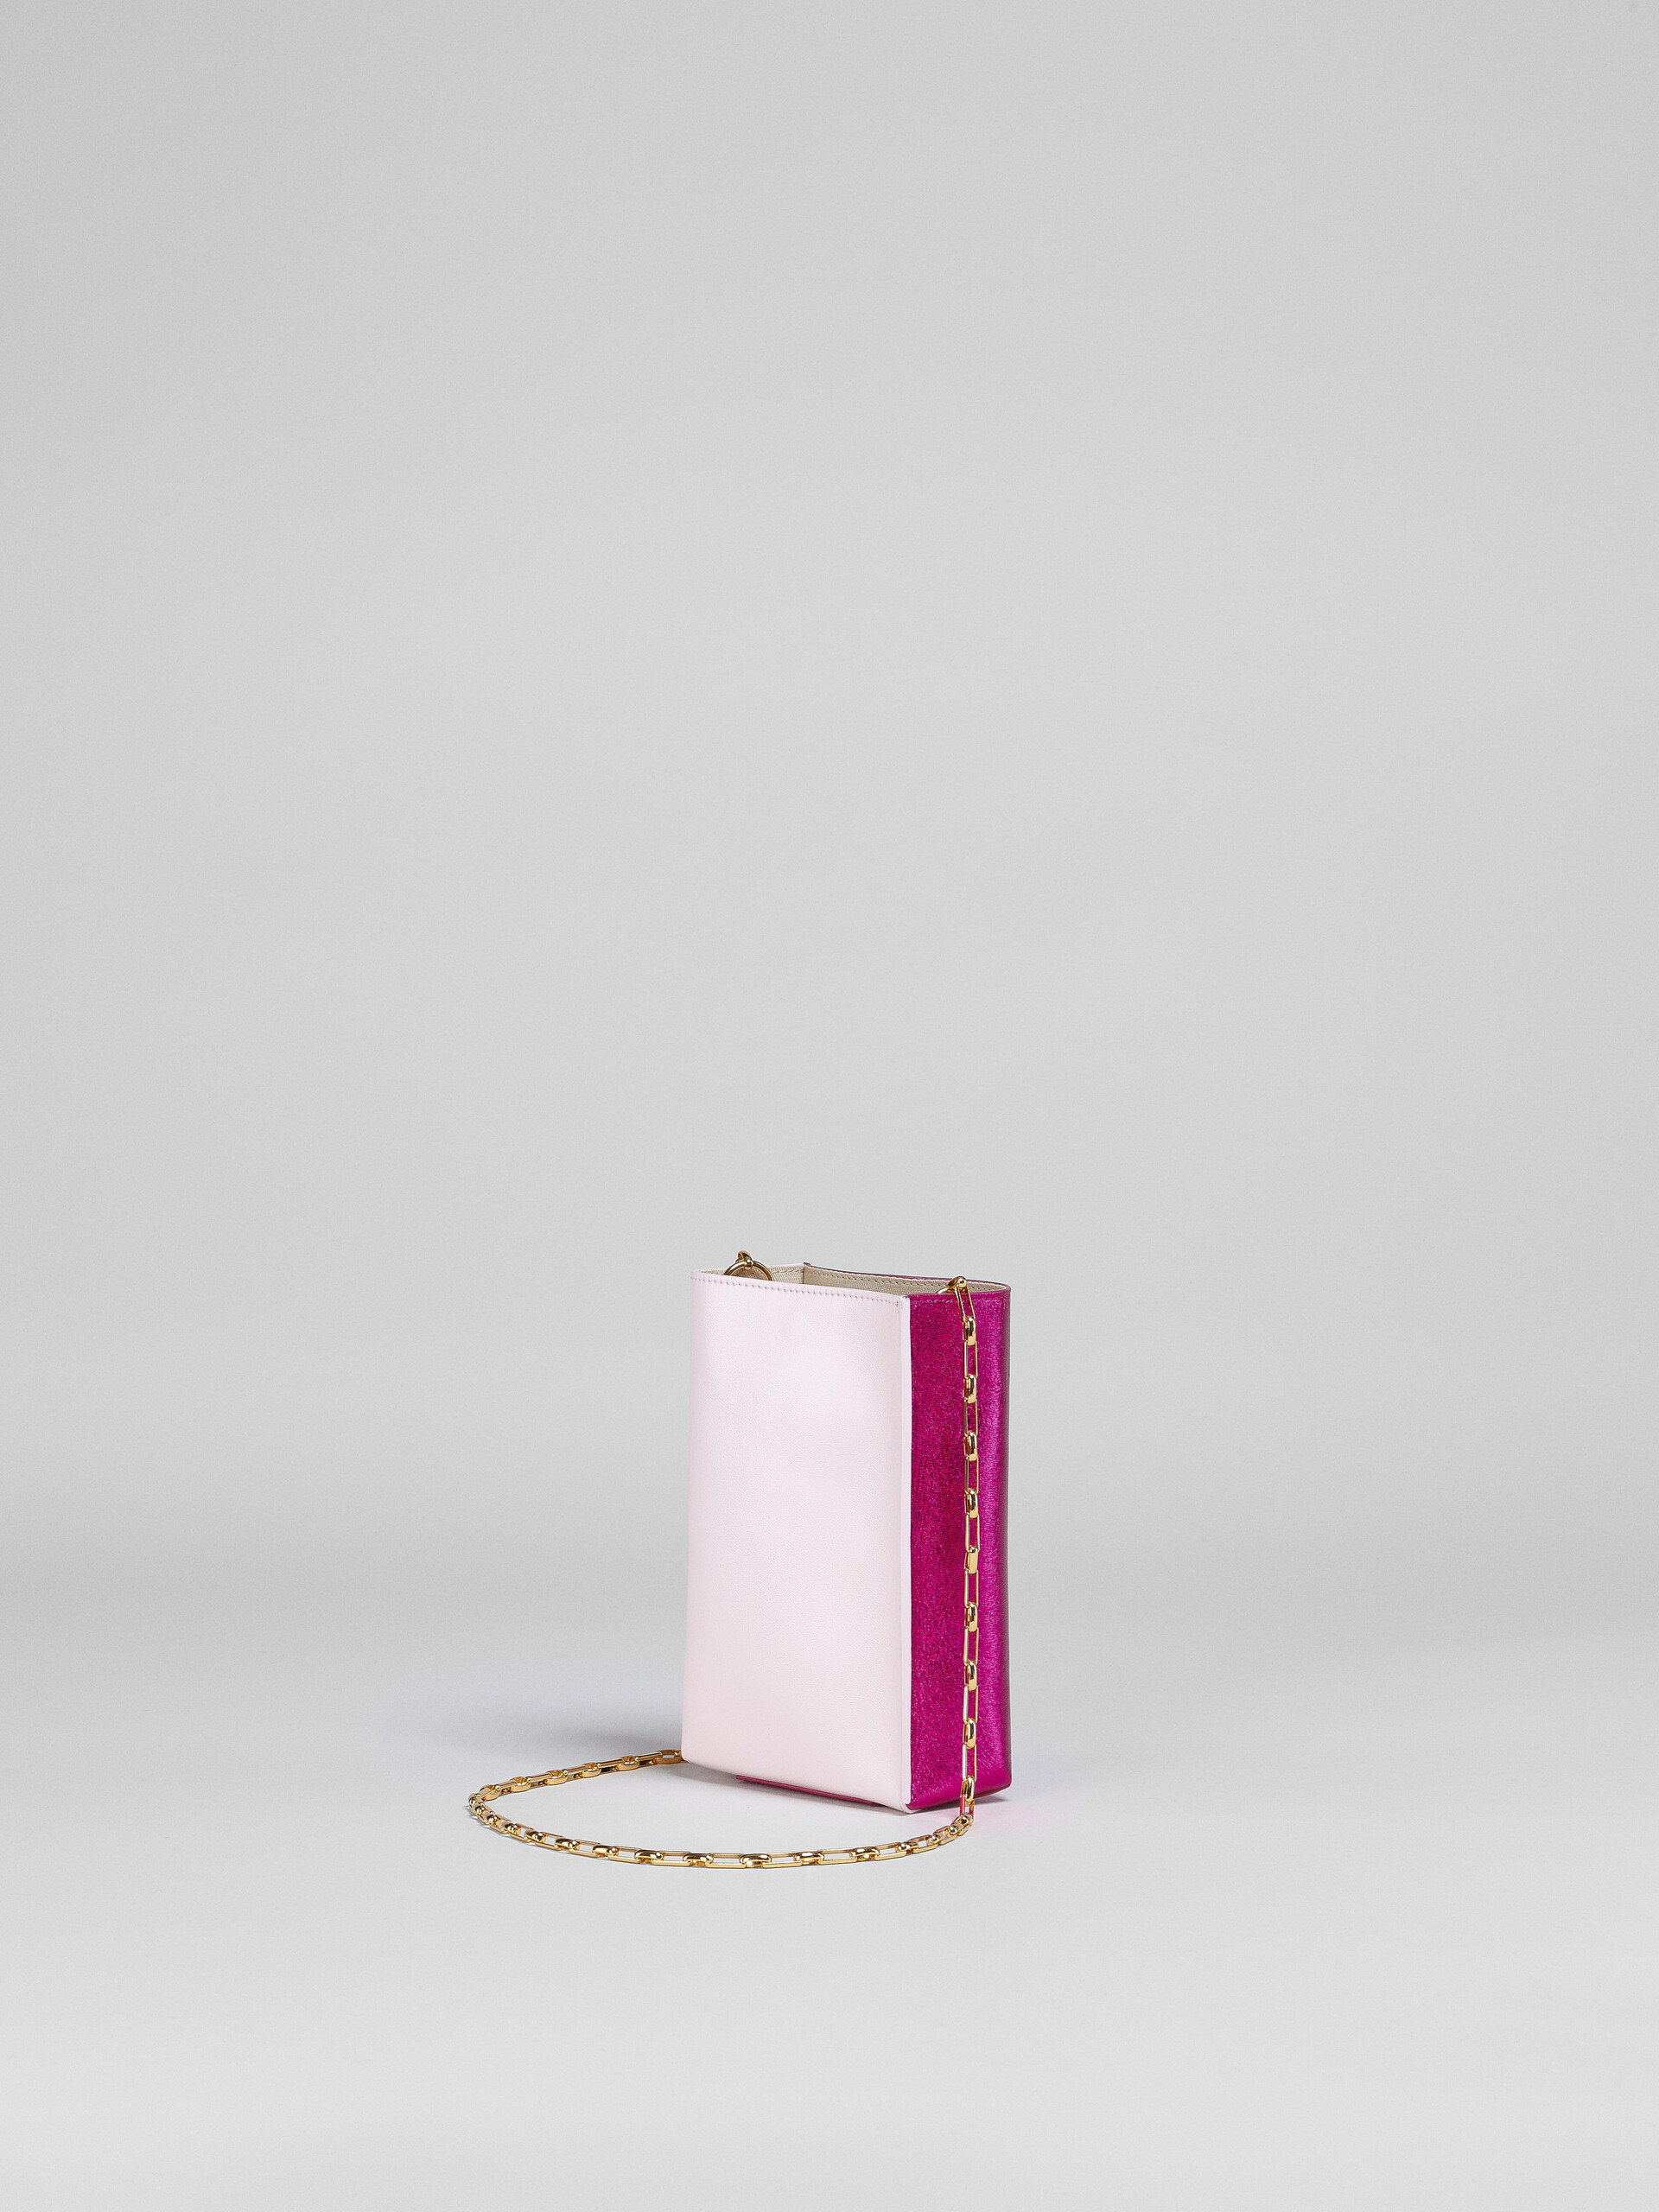 MUSEO SOFT nano bag in fuchsia and pink metallic leather - Shoulder Bags - Image 2